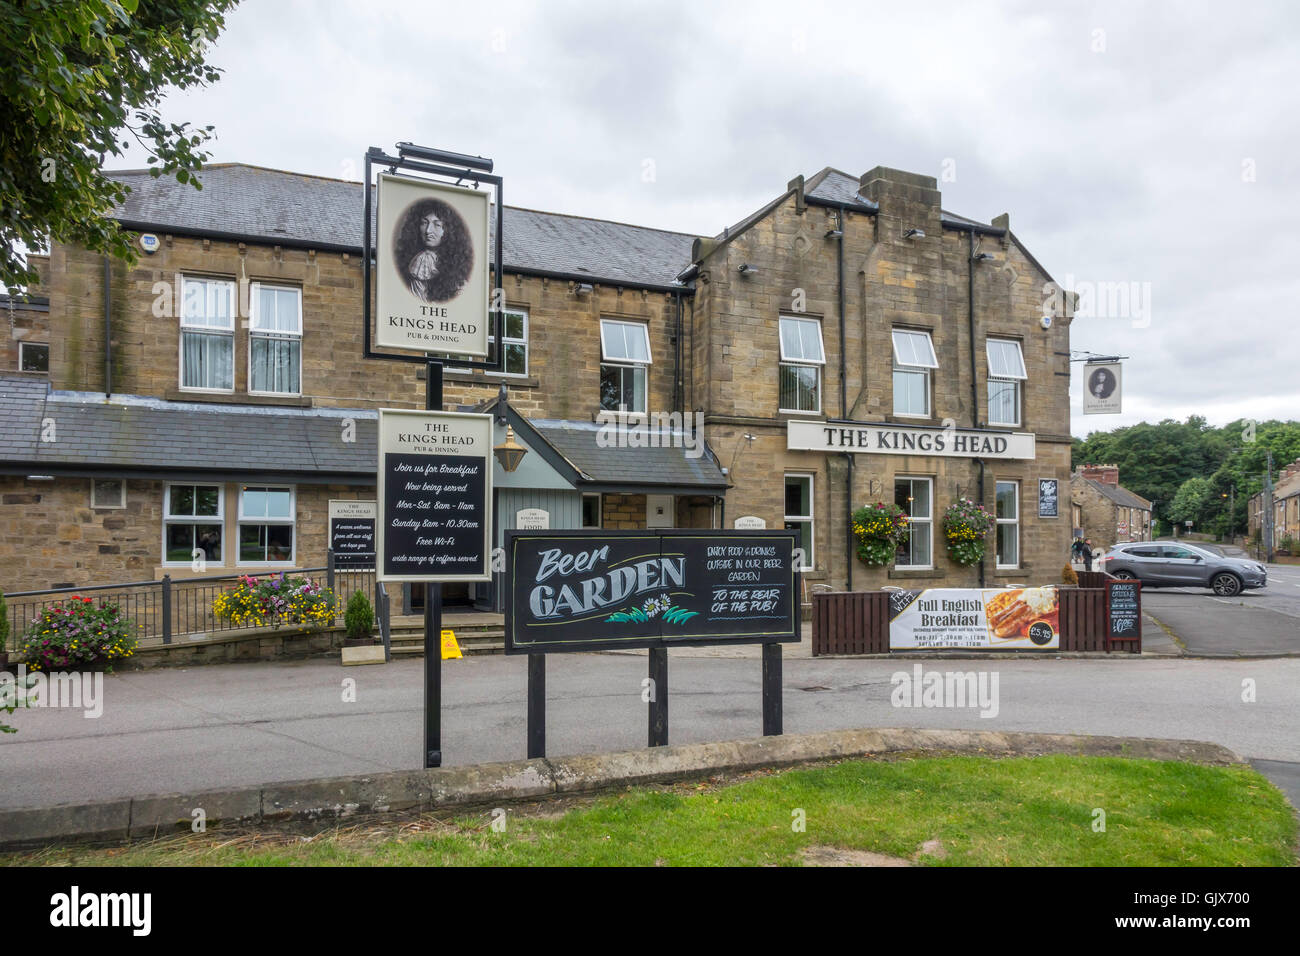 The Kings Head Pub in Lanchester Co. Durham England Stockfoto